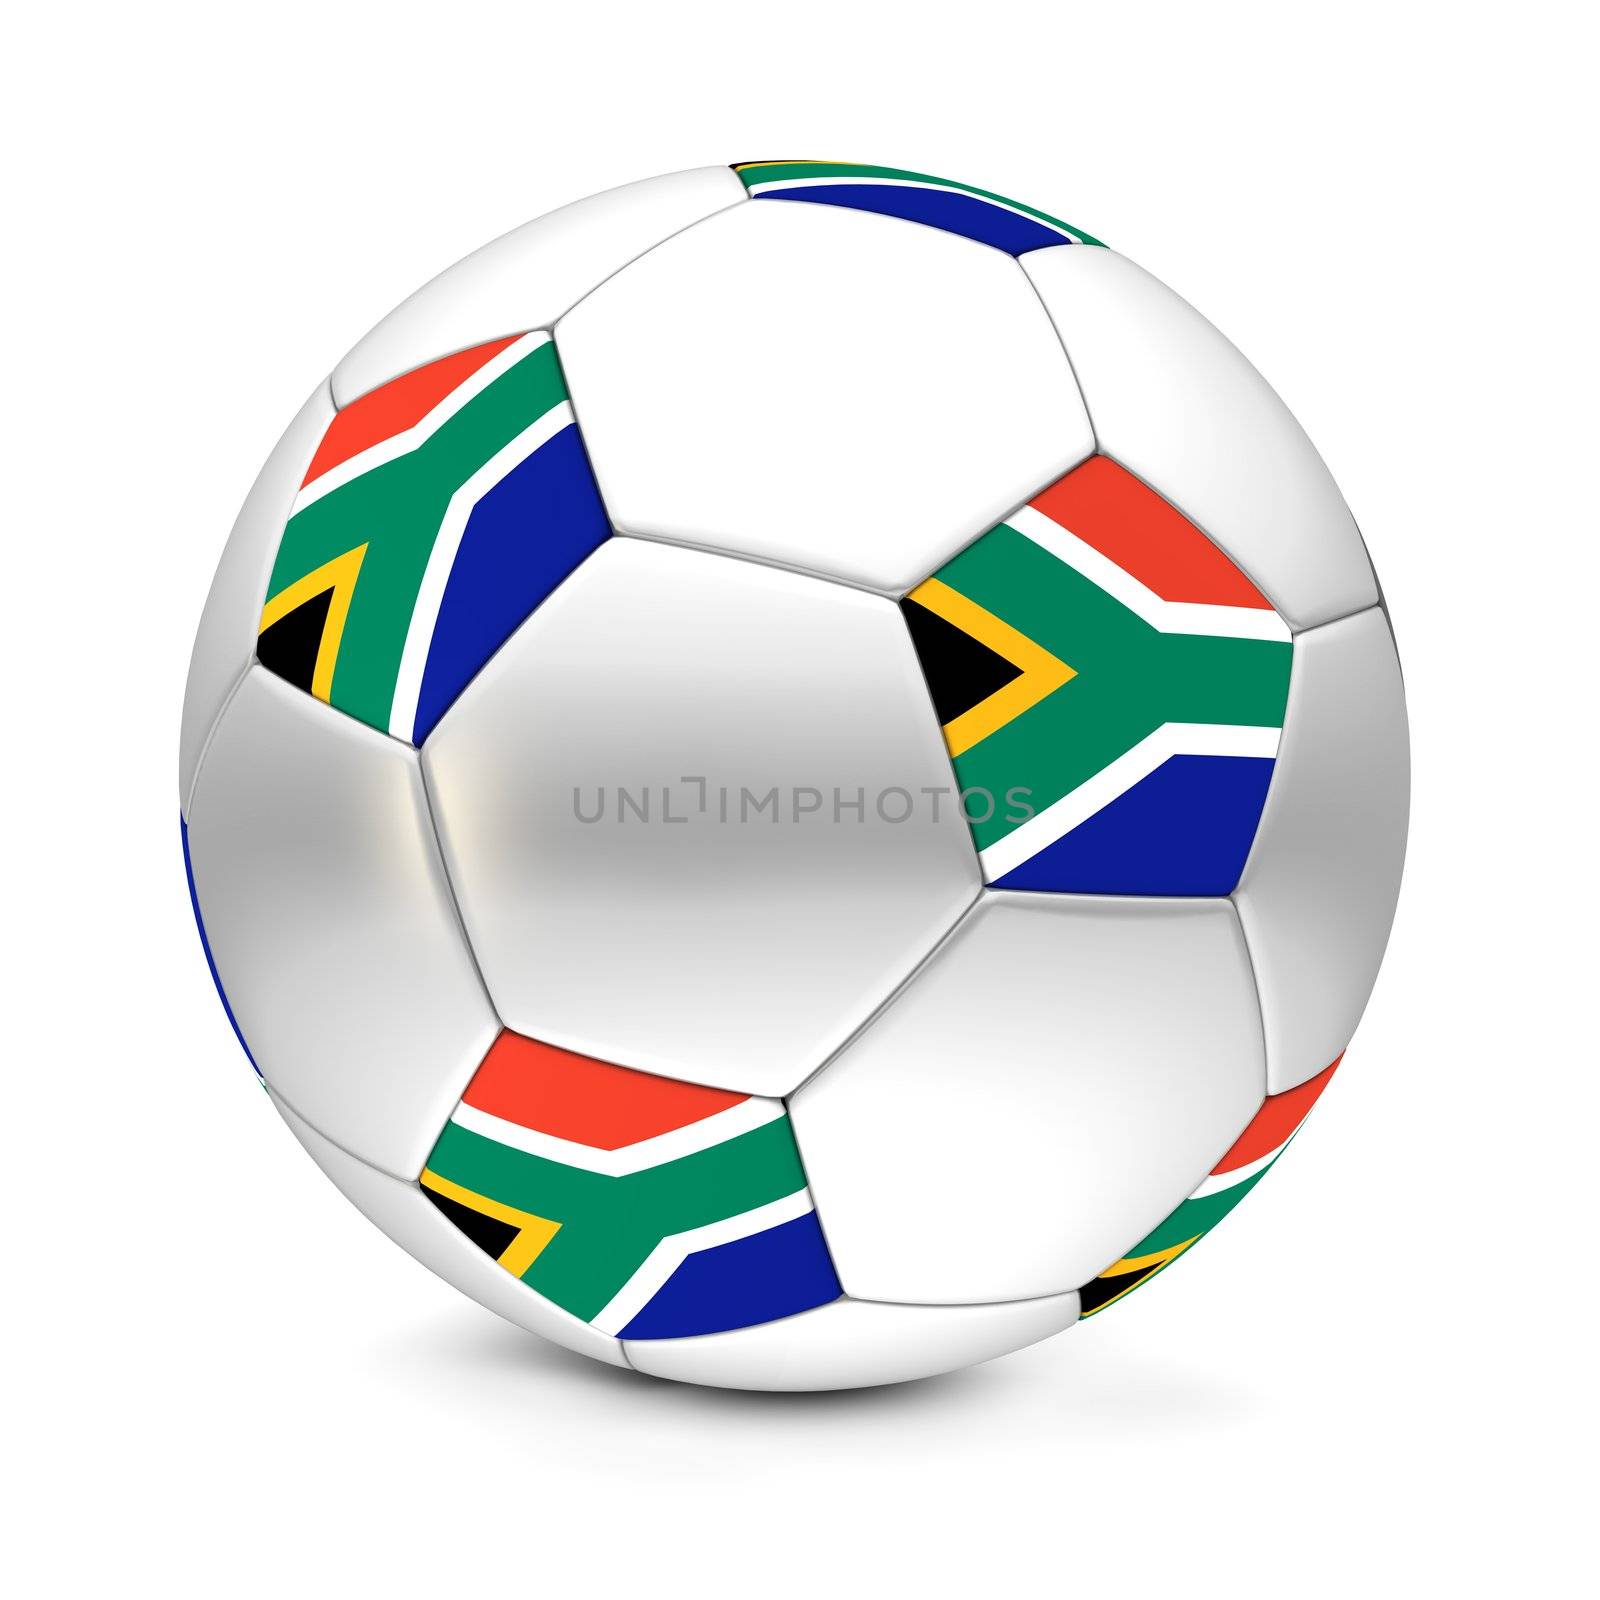 classic football/soccer ball consisting of silver metallic hexagons and pentagons with the flag of South Africa